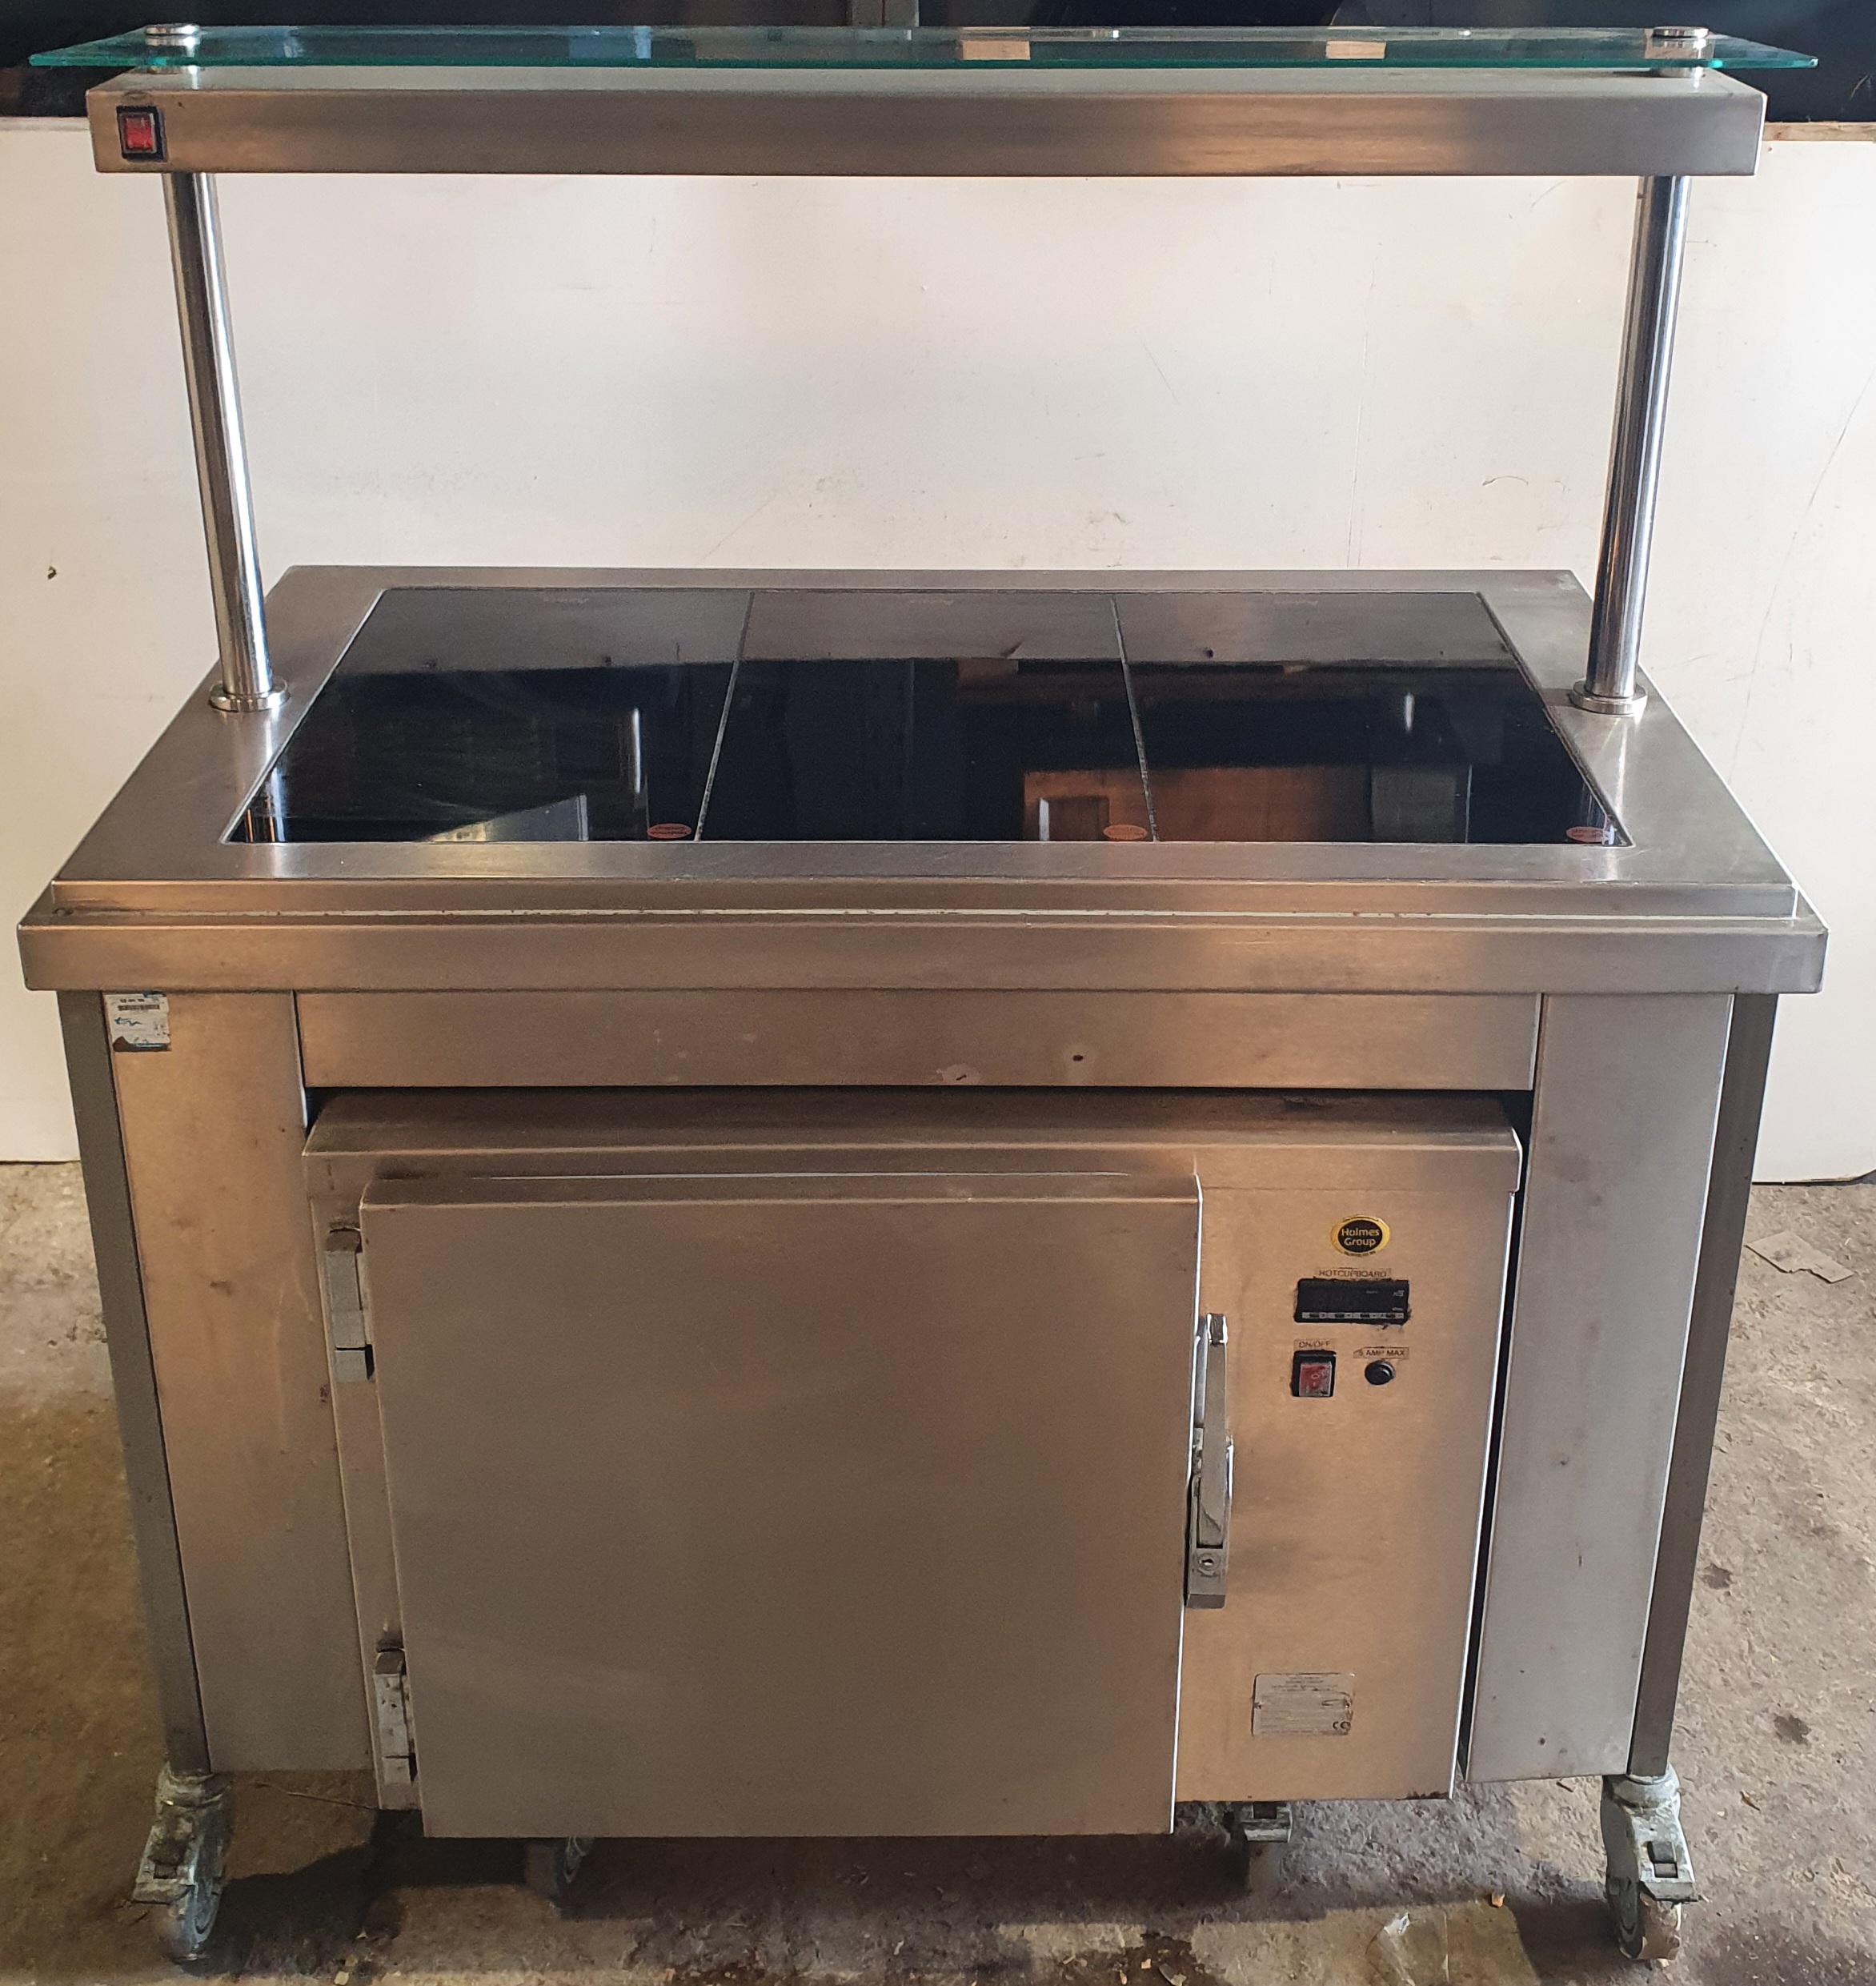 MOFFAT Heated Servery with Ceramic Surface and Hot Cupboard